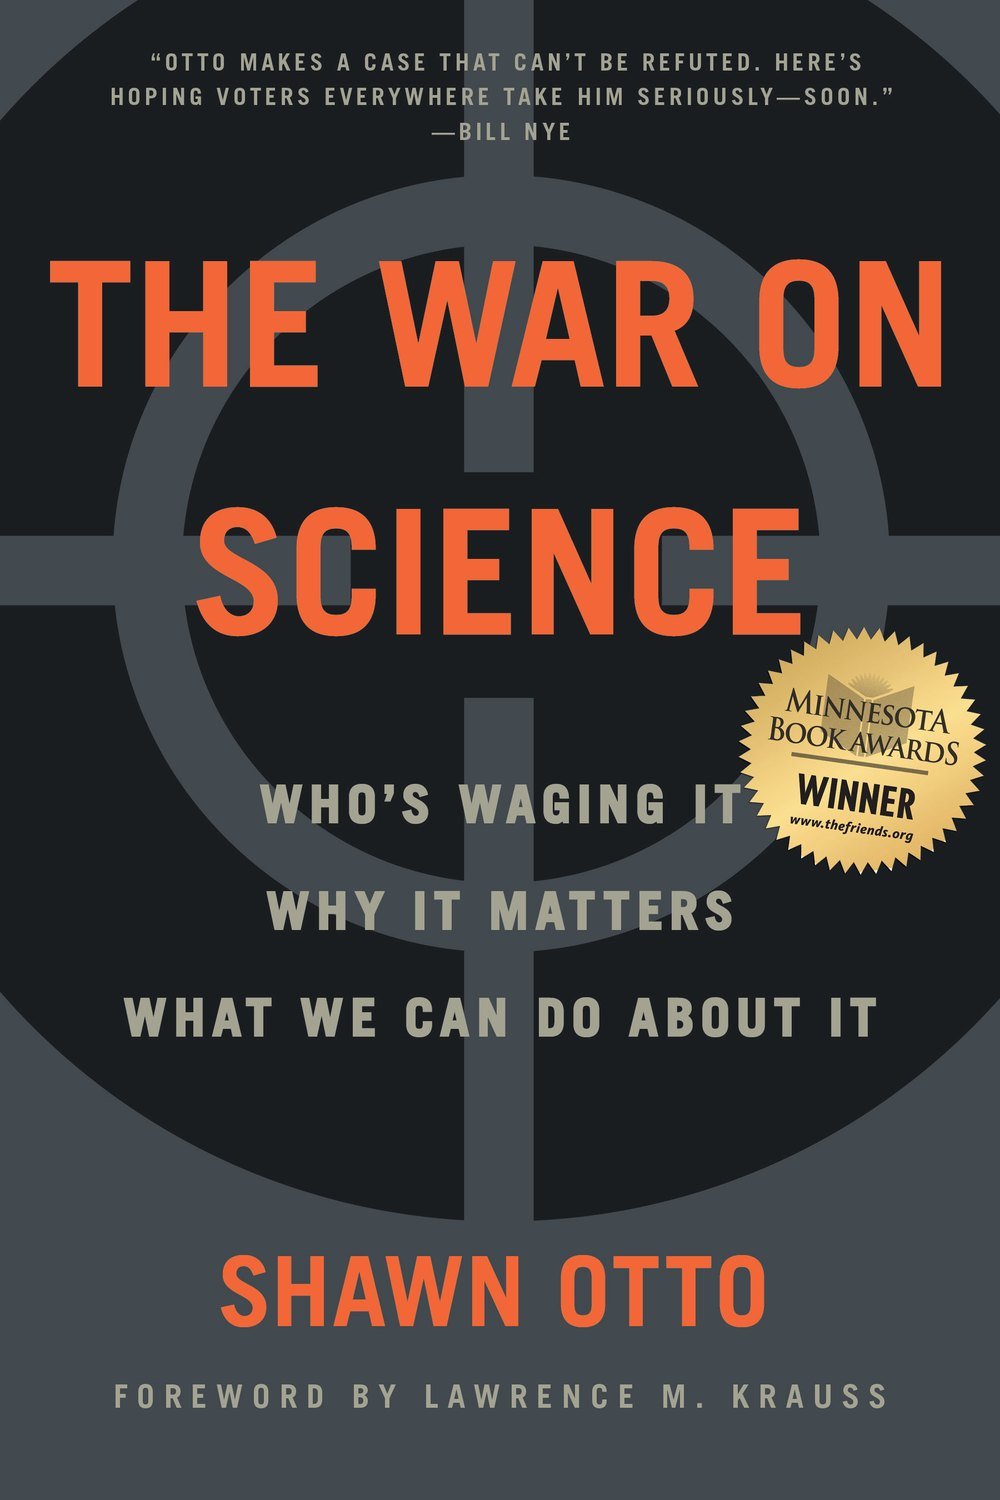 The War on Science (autographed copy)